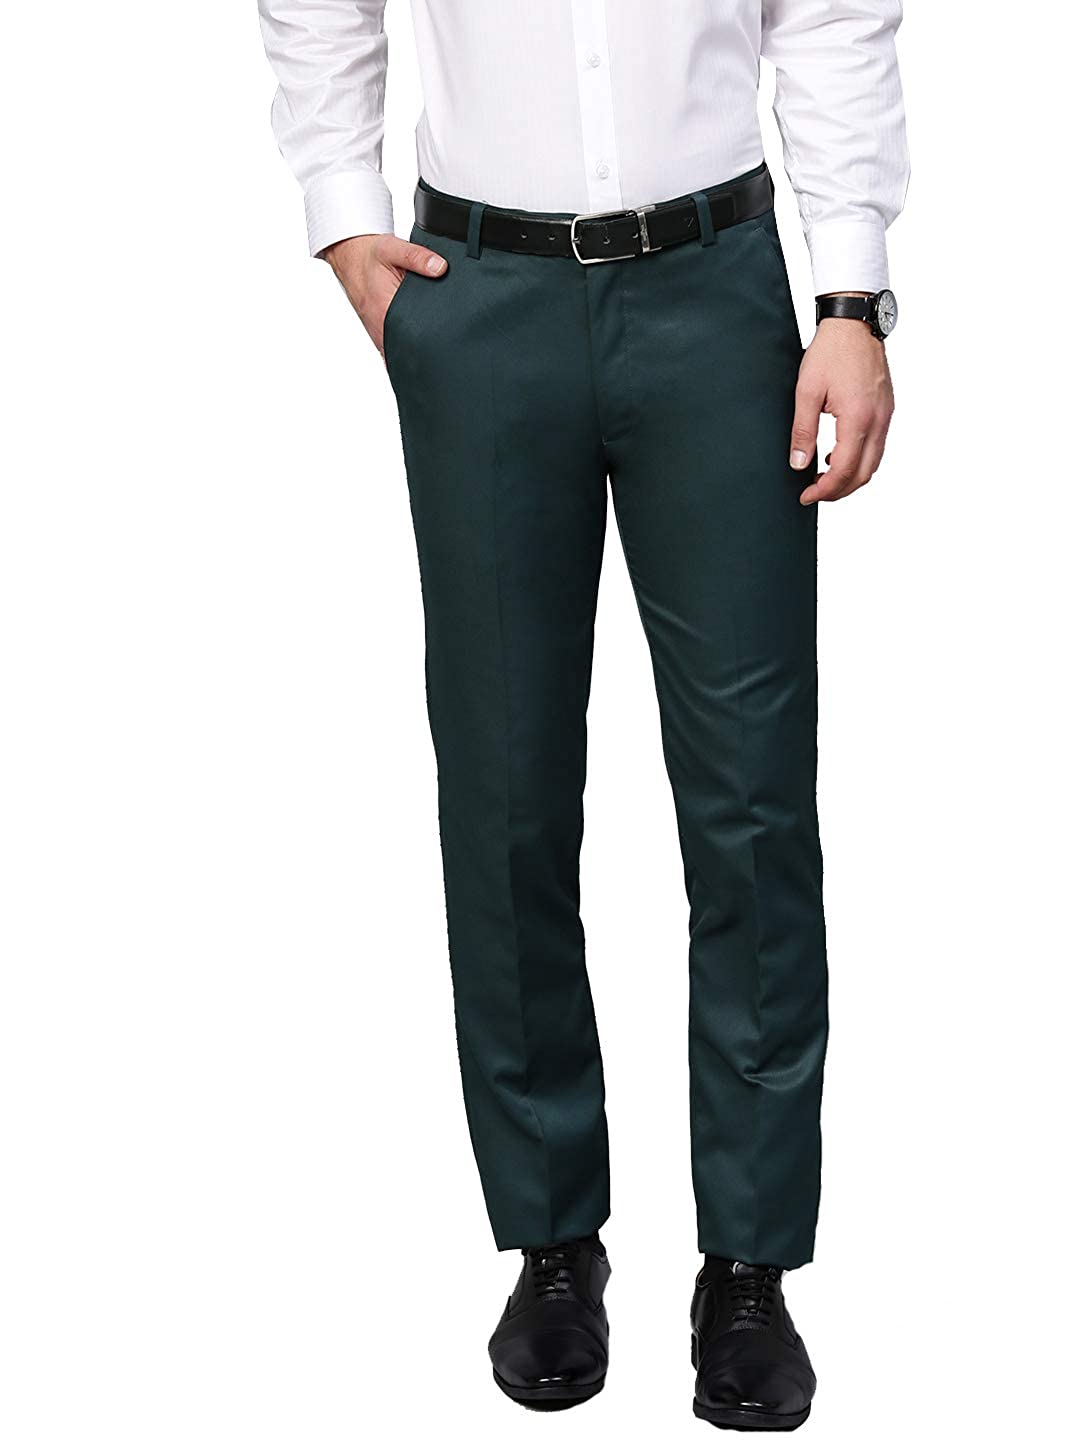 Green Pants Outfit / Suit Dress To Impress The Pants Of Your Dreams | Shirt  outfit men, Men fashion casual shirts, Mens business casual outfits